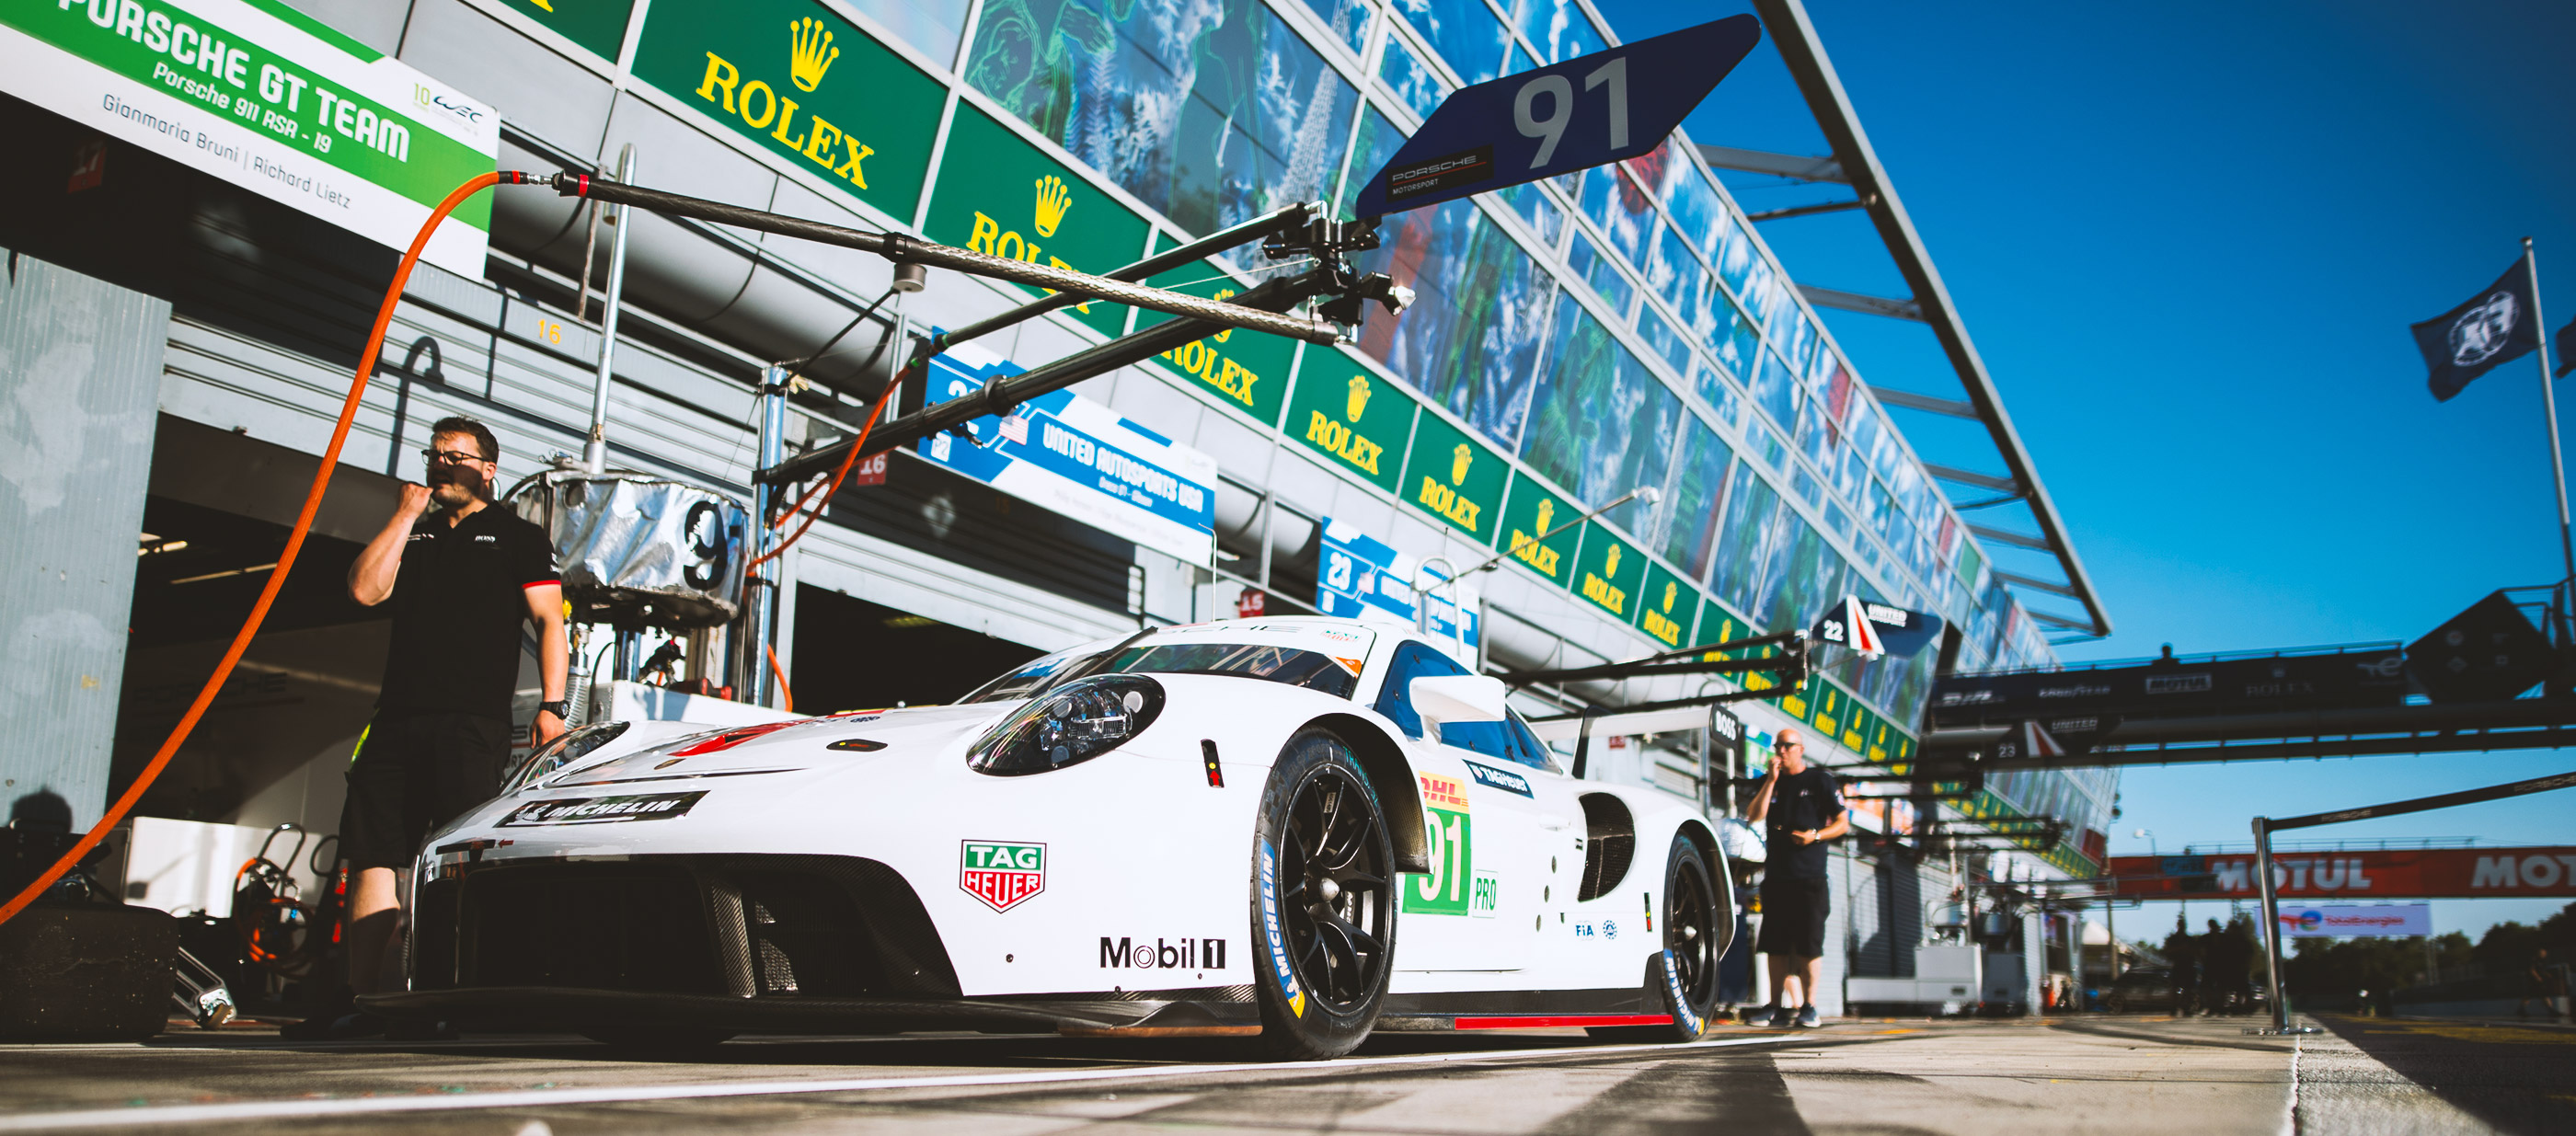 Introducing an exceptional year for the FIA World Endurance Championship